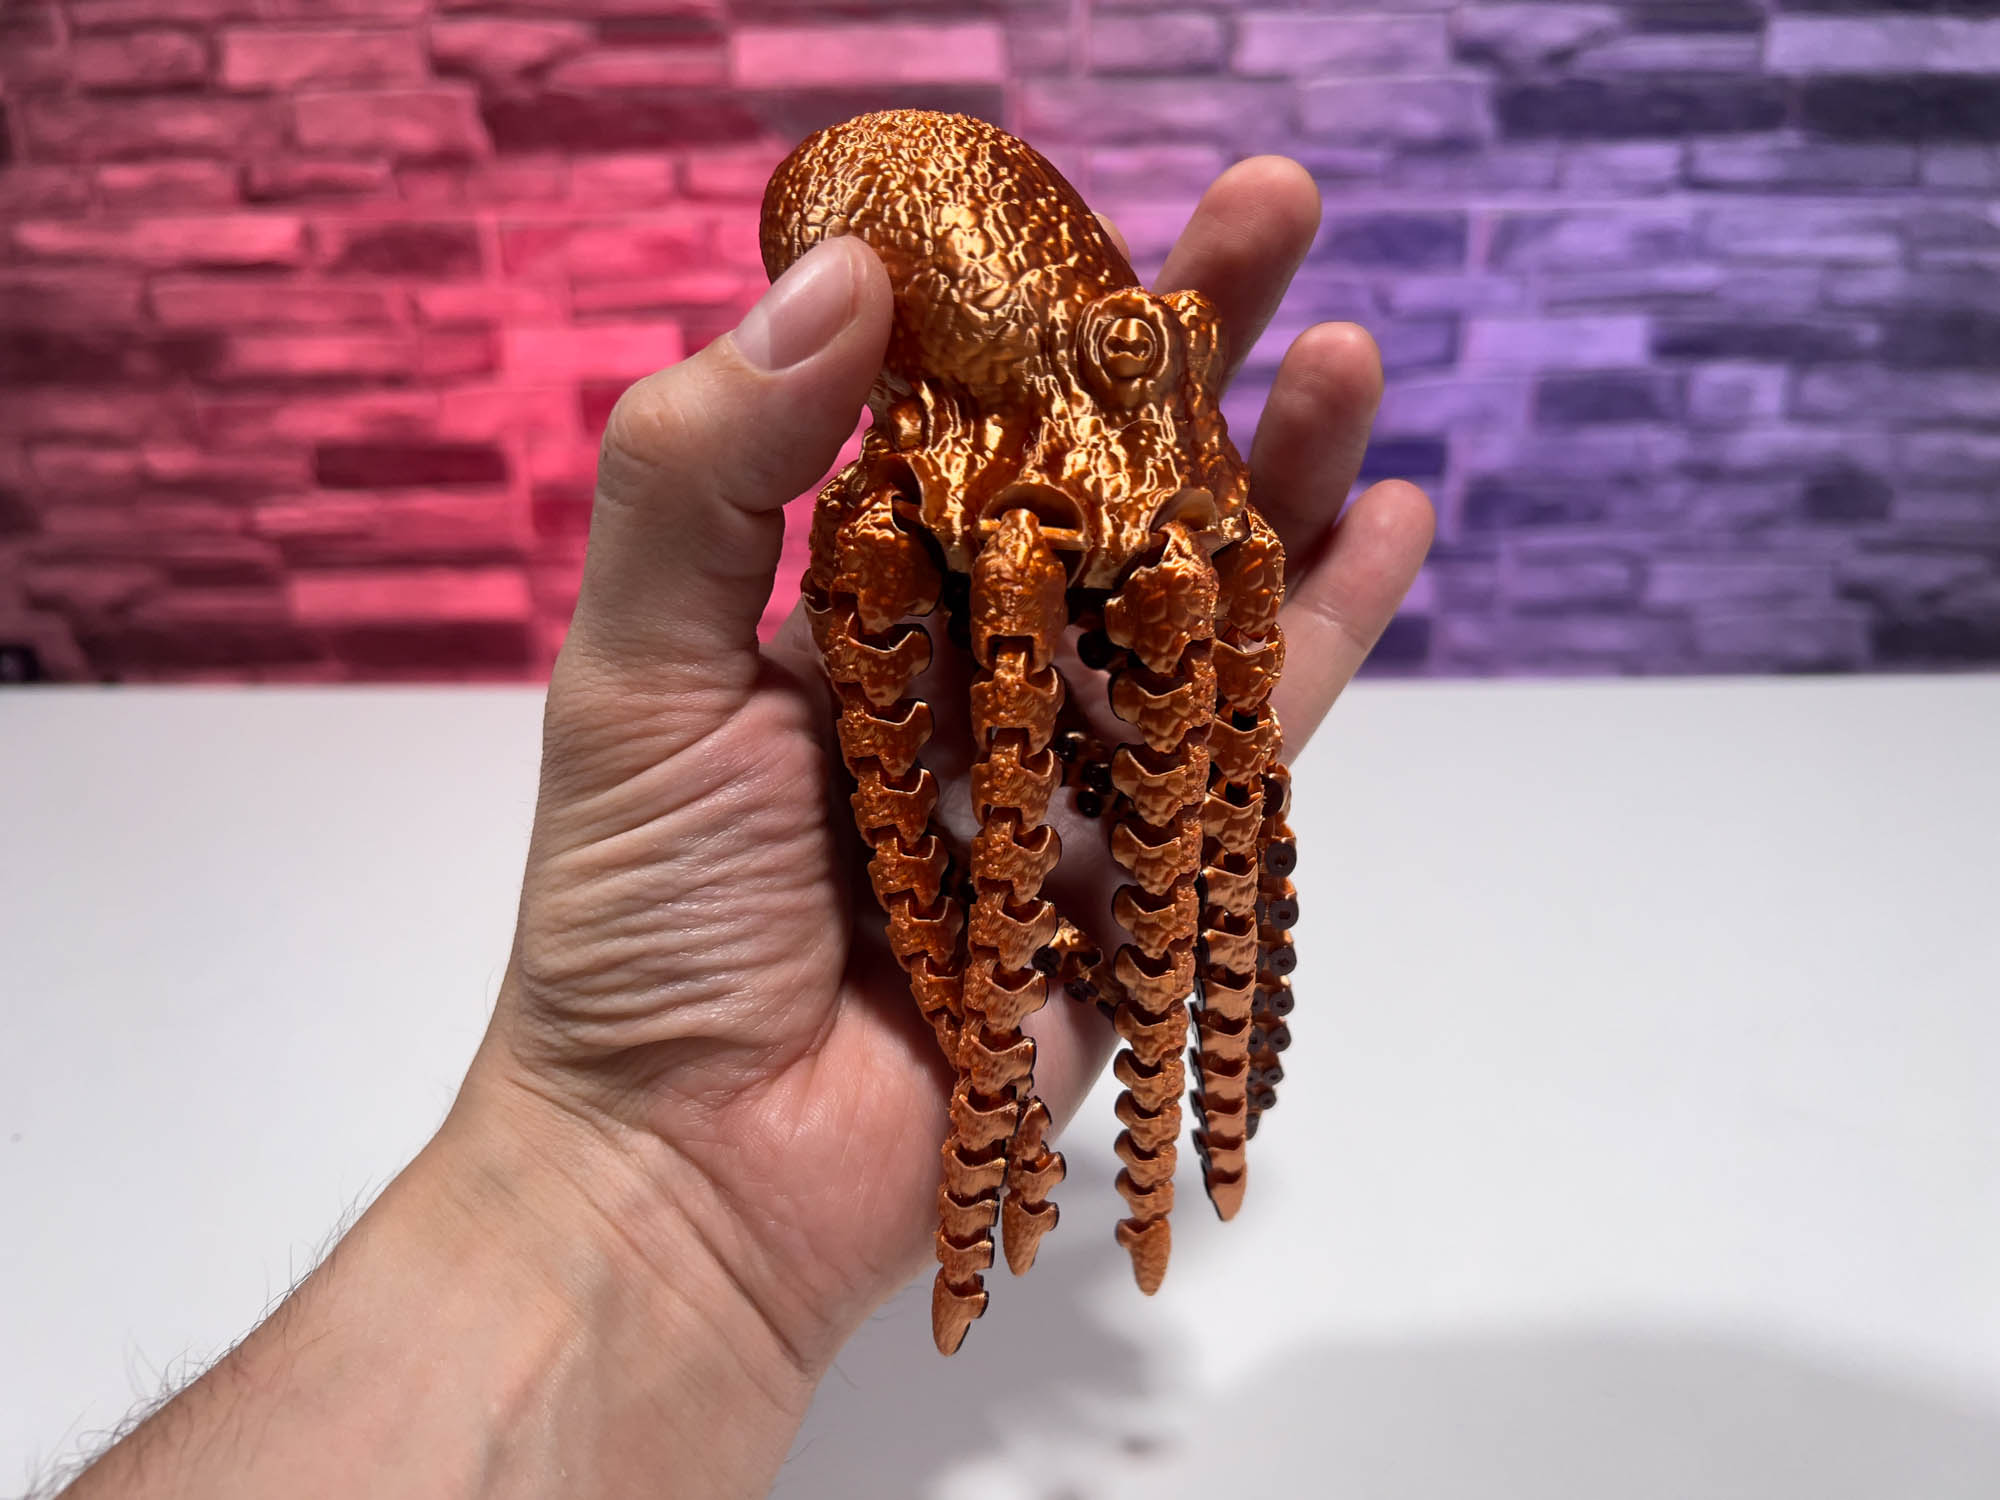 3D Printed Articulated Octopus 2.0